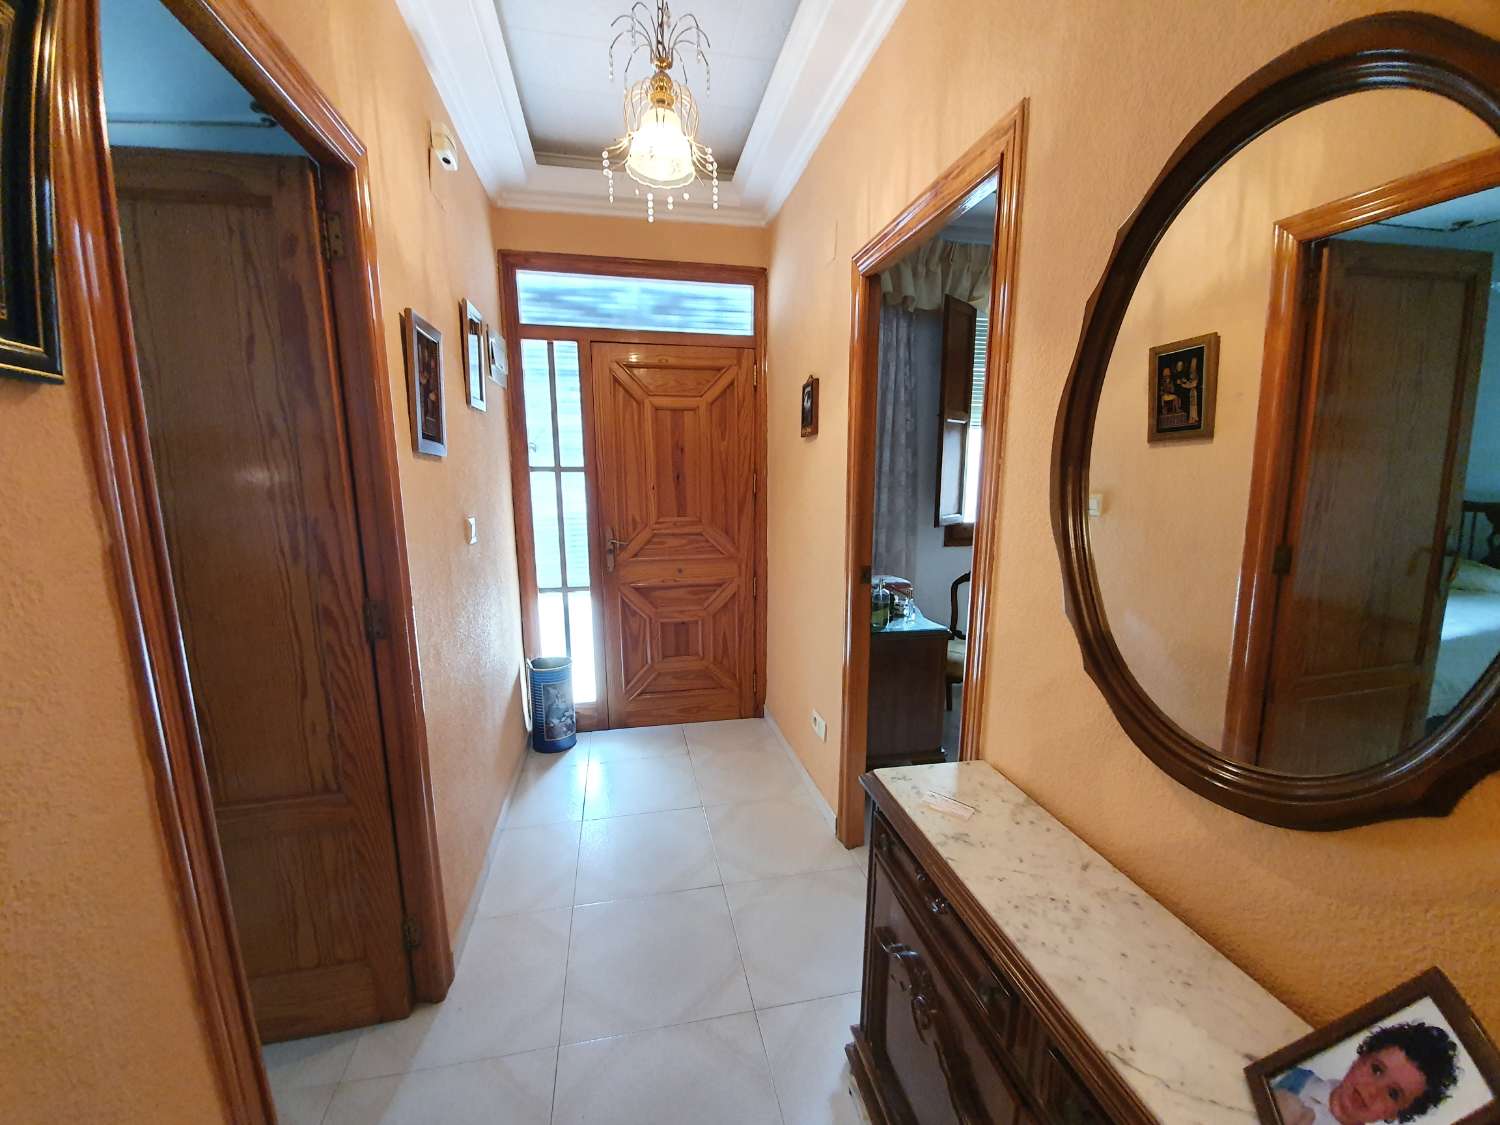 House for sale in Villalonga